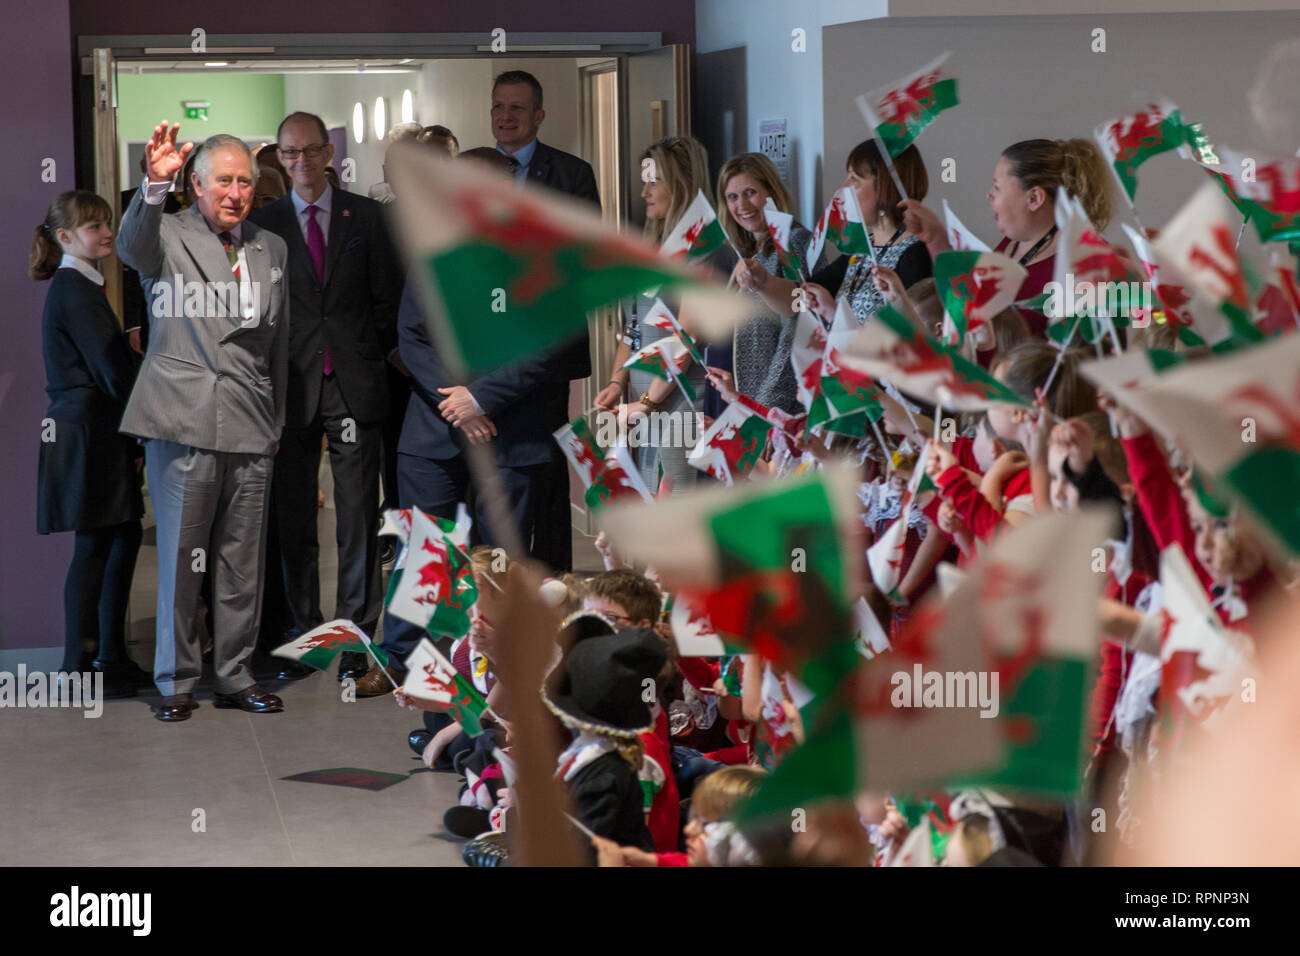 The Prince of Wales in his role of President, The Prince's Trust, waves goodbye to children after a visit Ysgol Cwm Brombil co-educational school in Port Talbot, Wales, which is involved in delivering The Trust's Achieve programme. Stock Photo